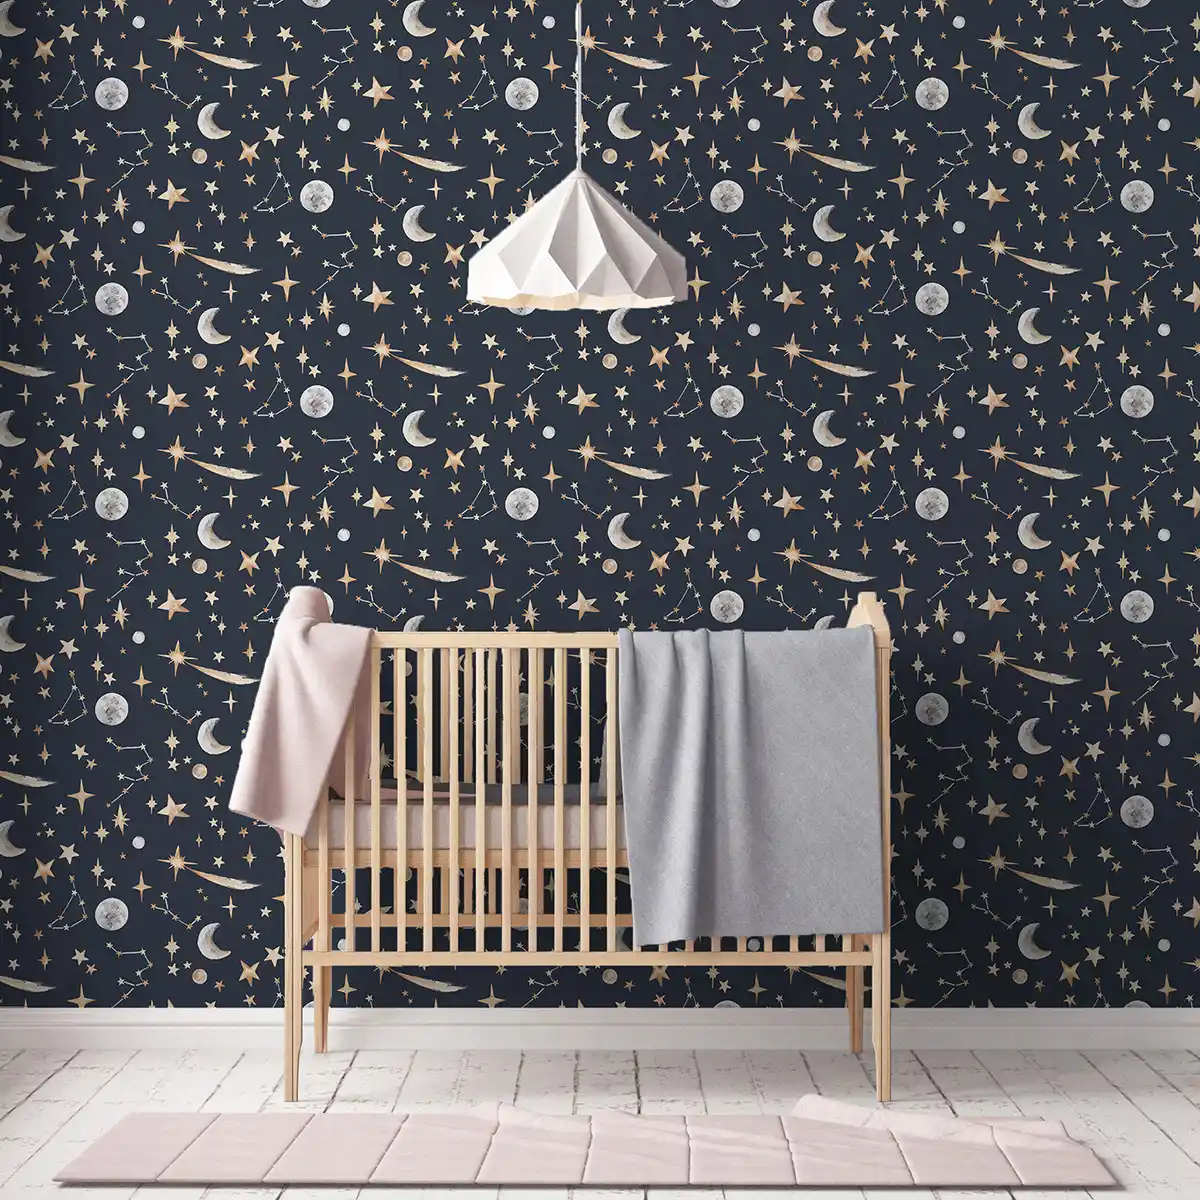 Whimsical Friends Designer Wallpaper (Mural) - Love Your Space